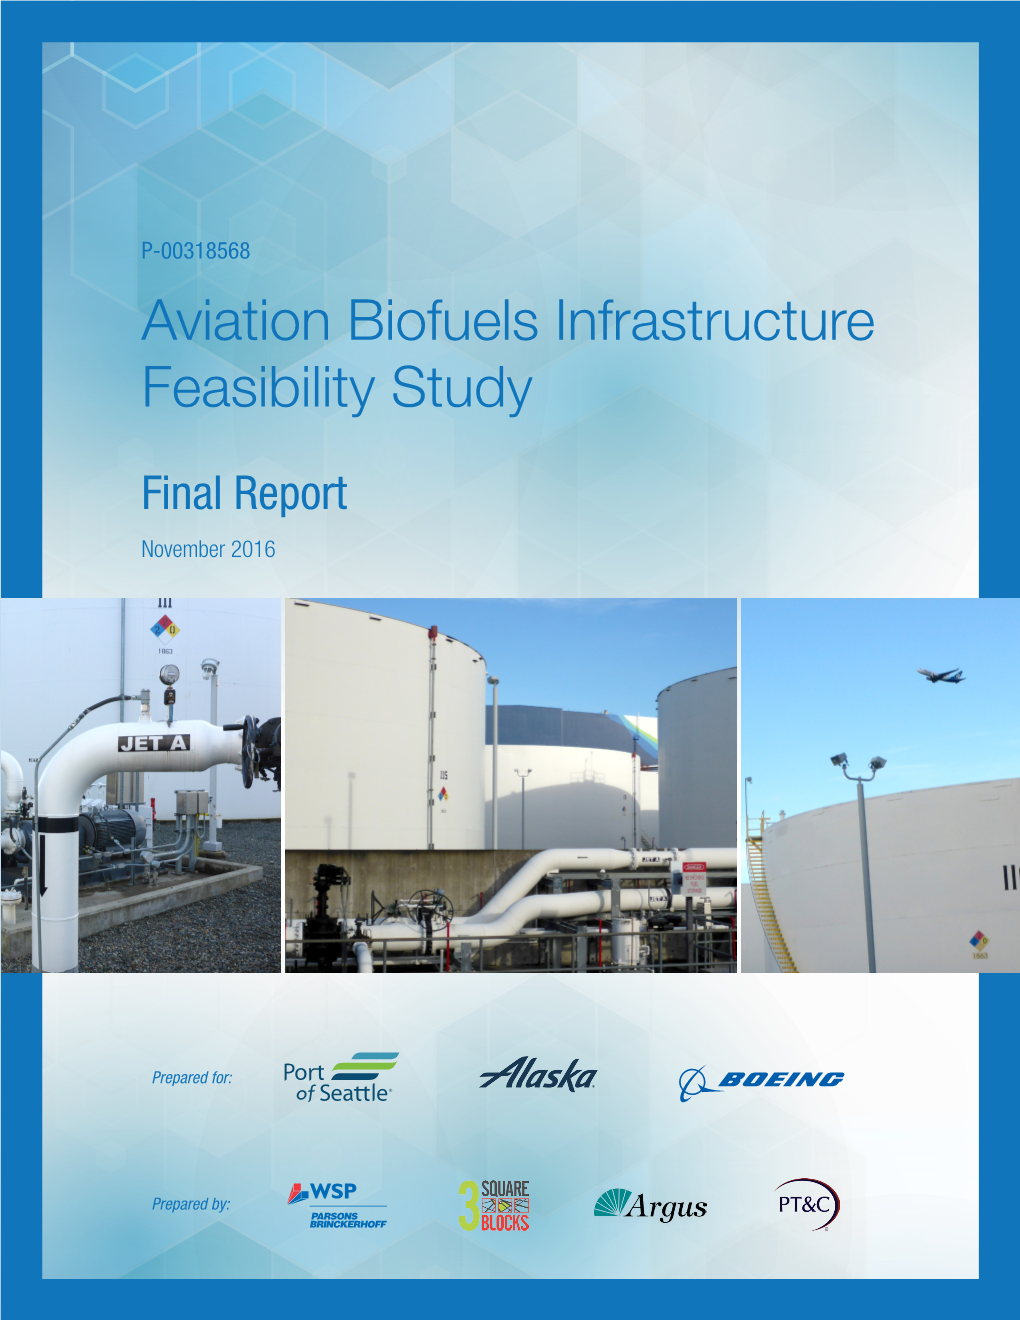 Aviation Biofuels Infrastructure Feasibility Study